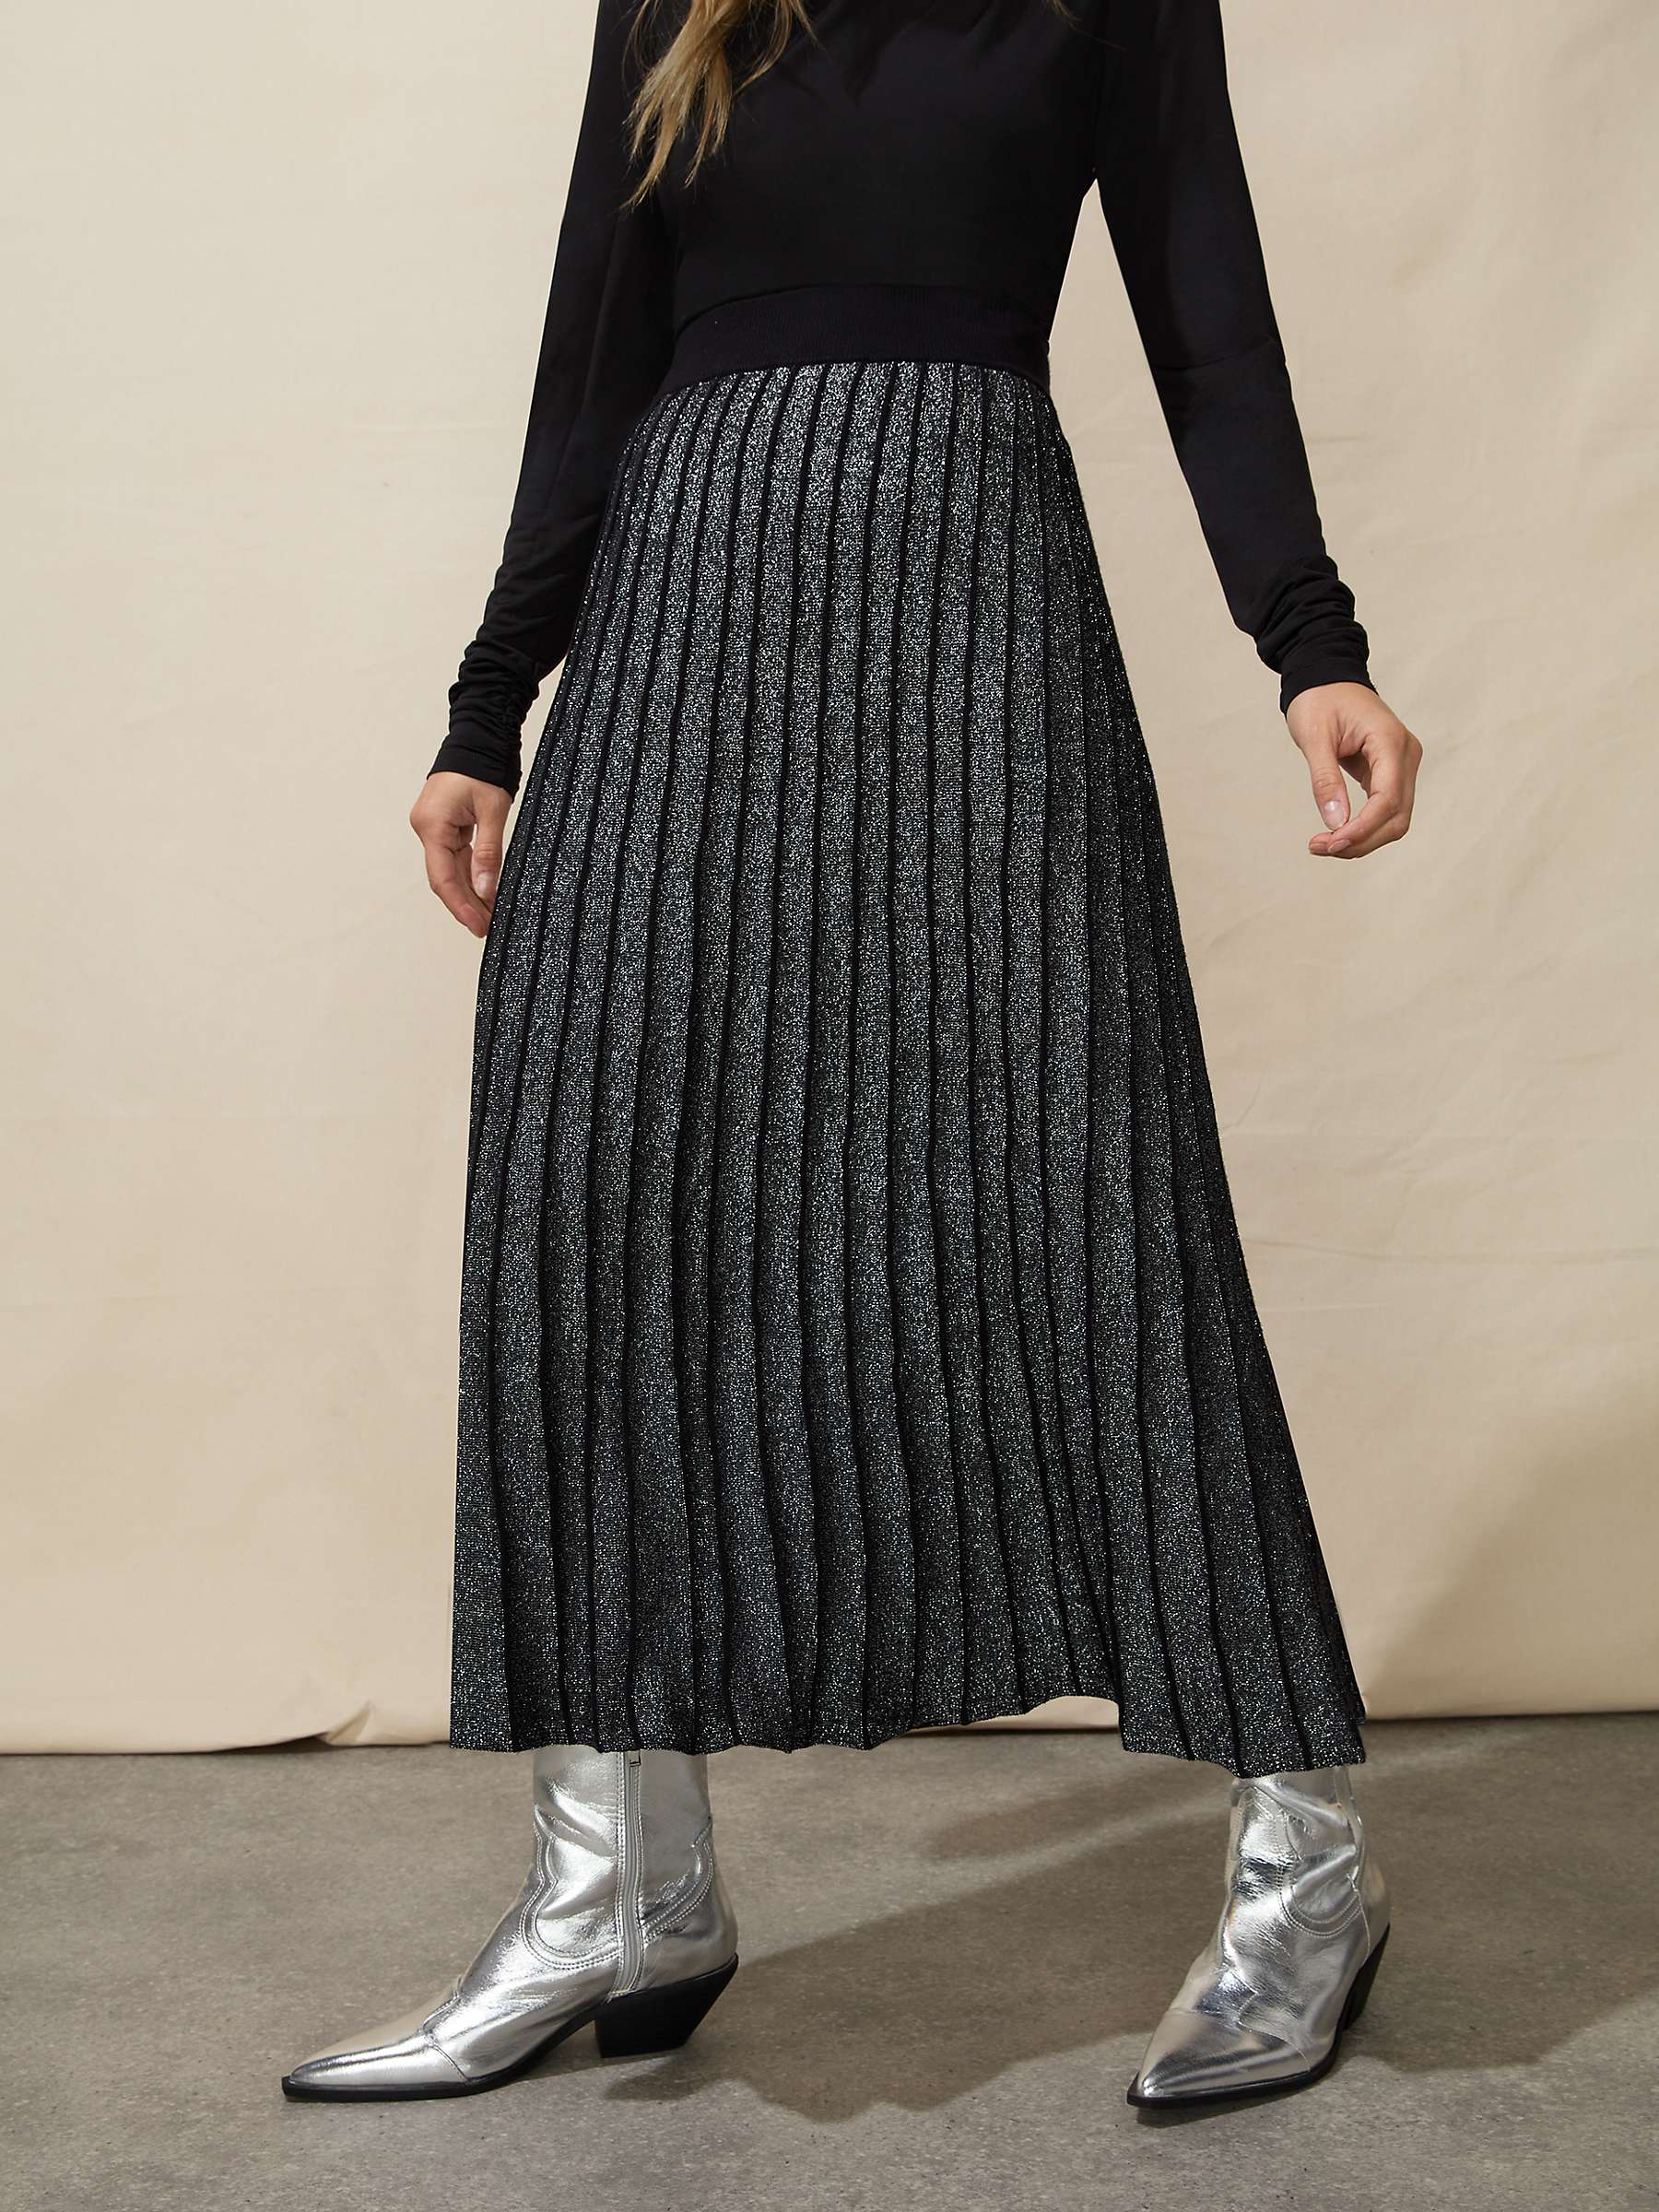 Buy Ro&Zo Knit Pleated Midi Skirt, Black/Silver Online at johnlewis.com